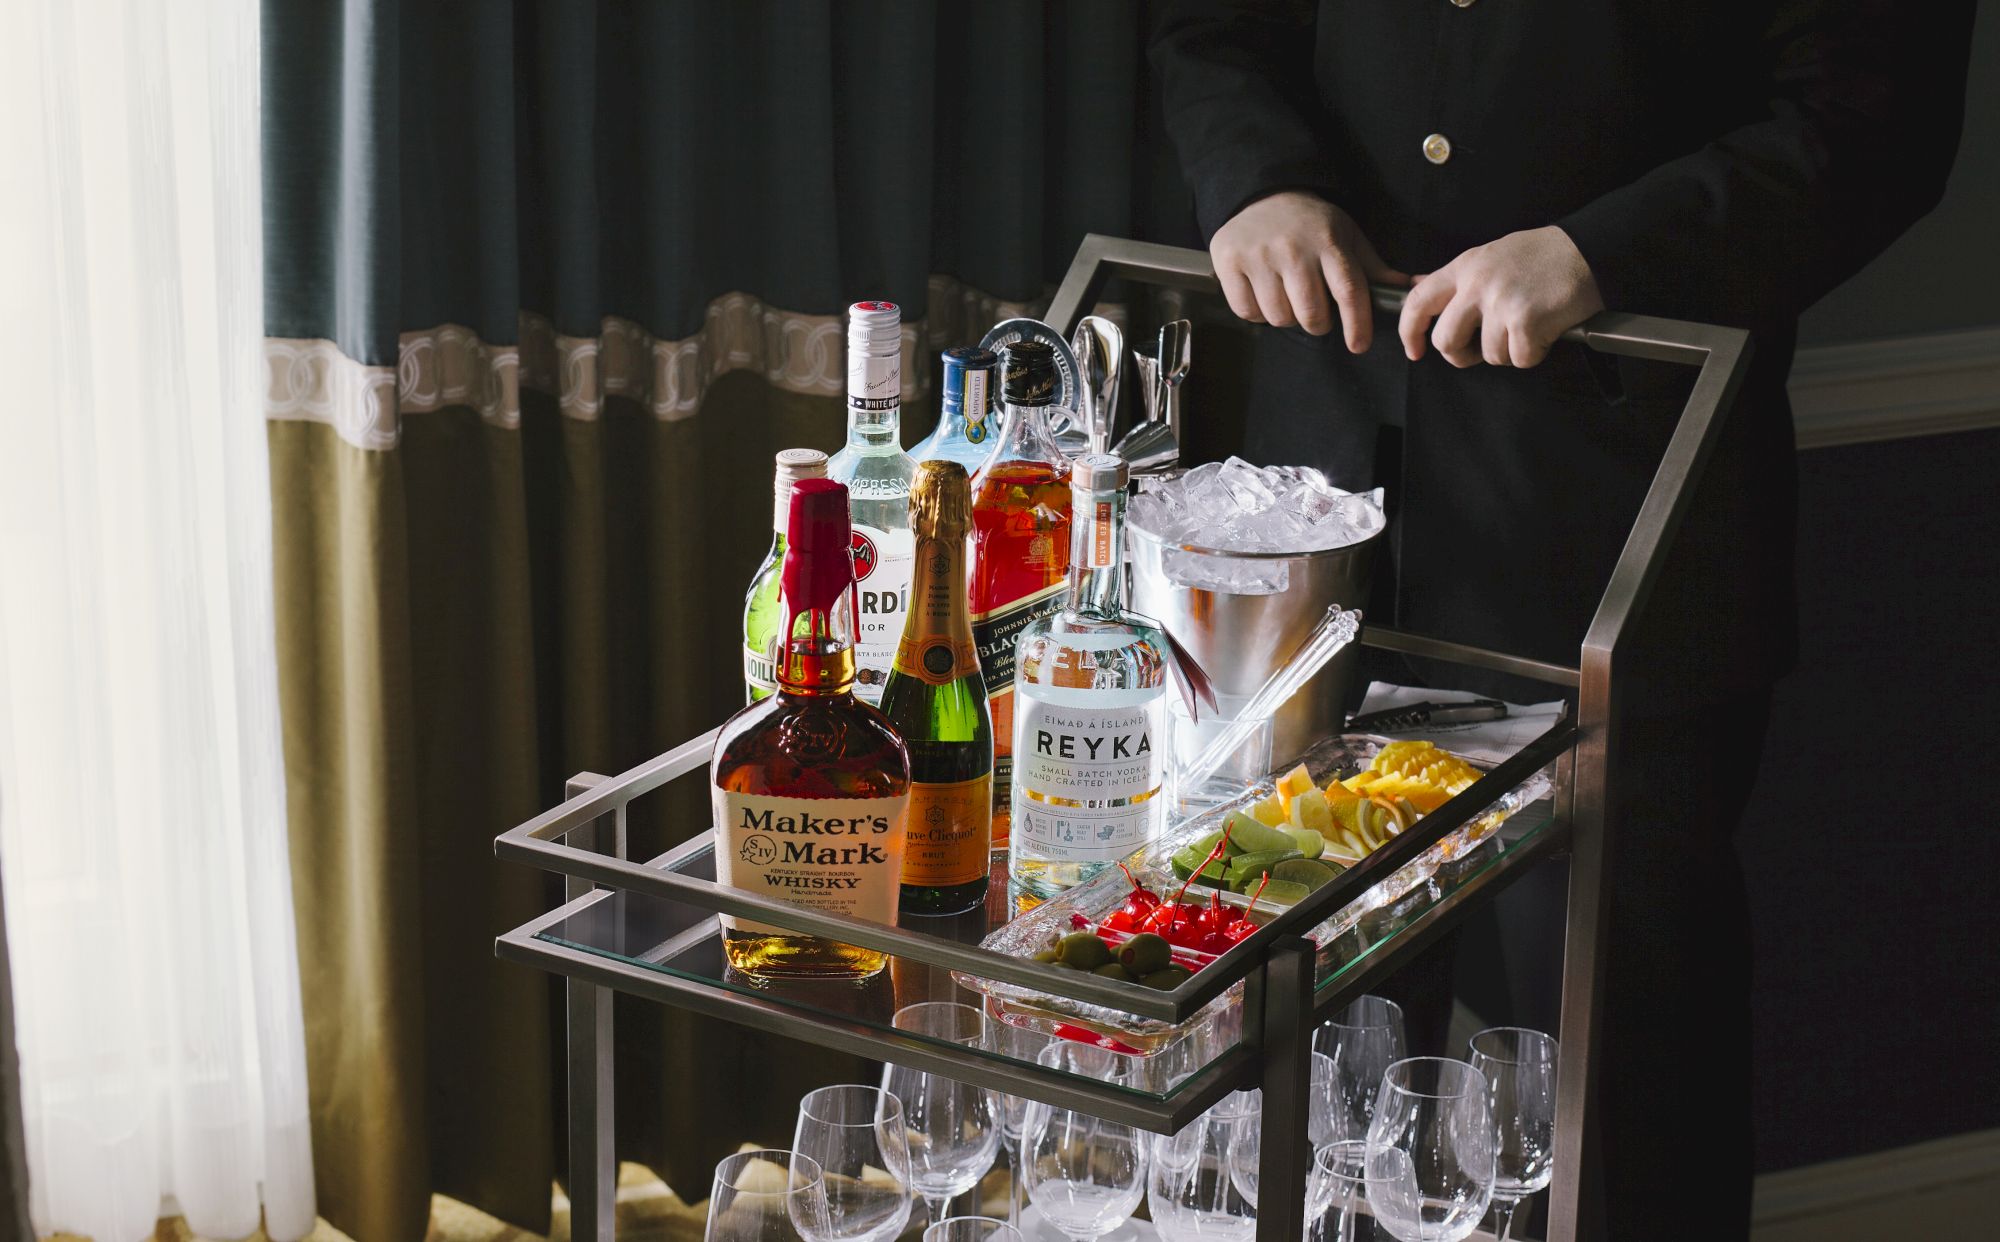 A bar cart with various bottles, ice bucket, and garnishes.